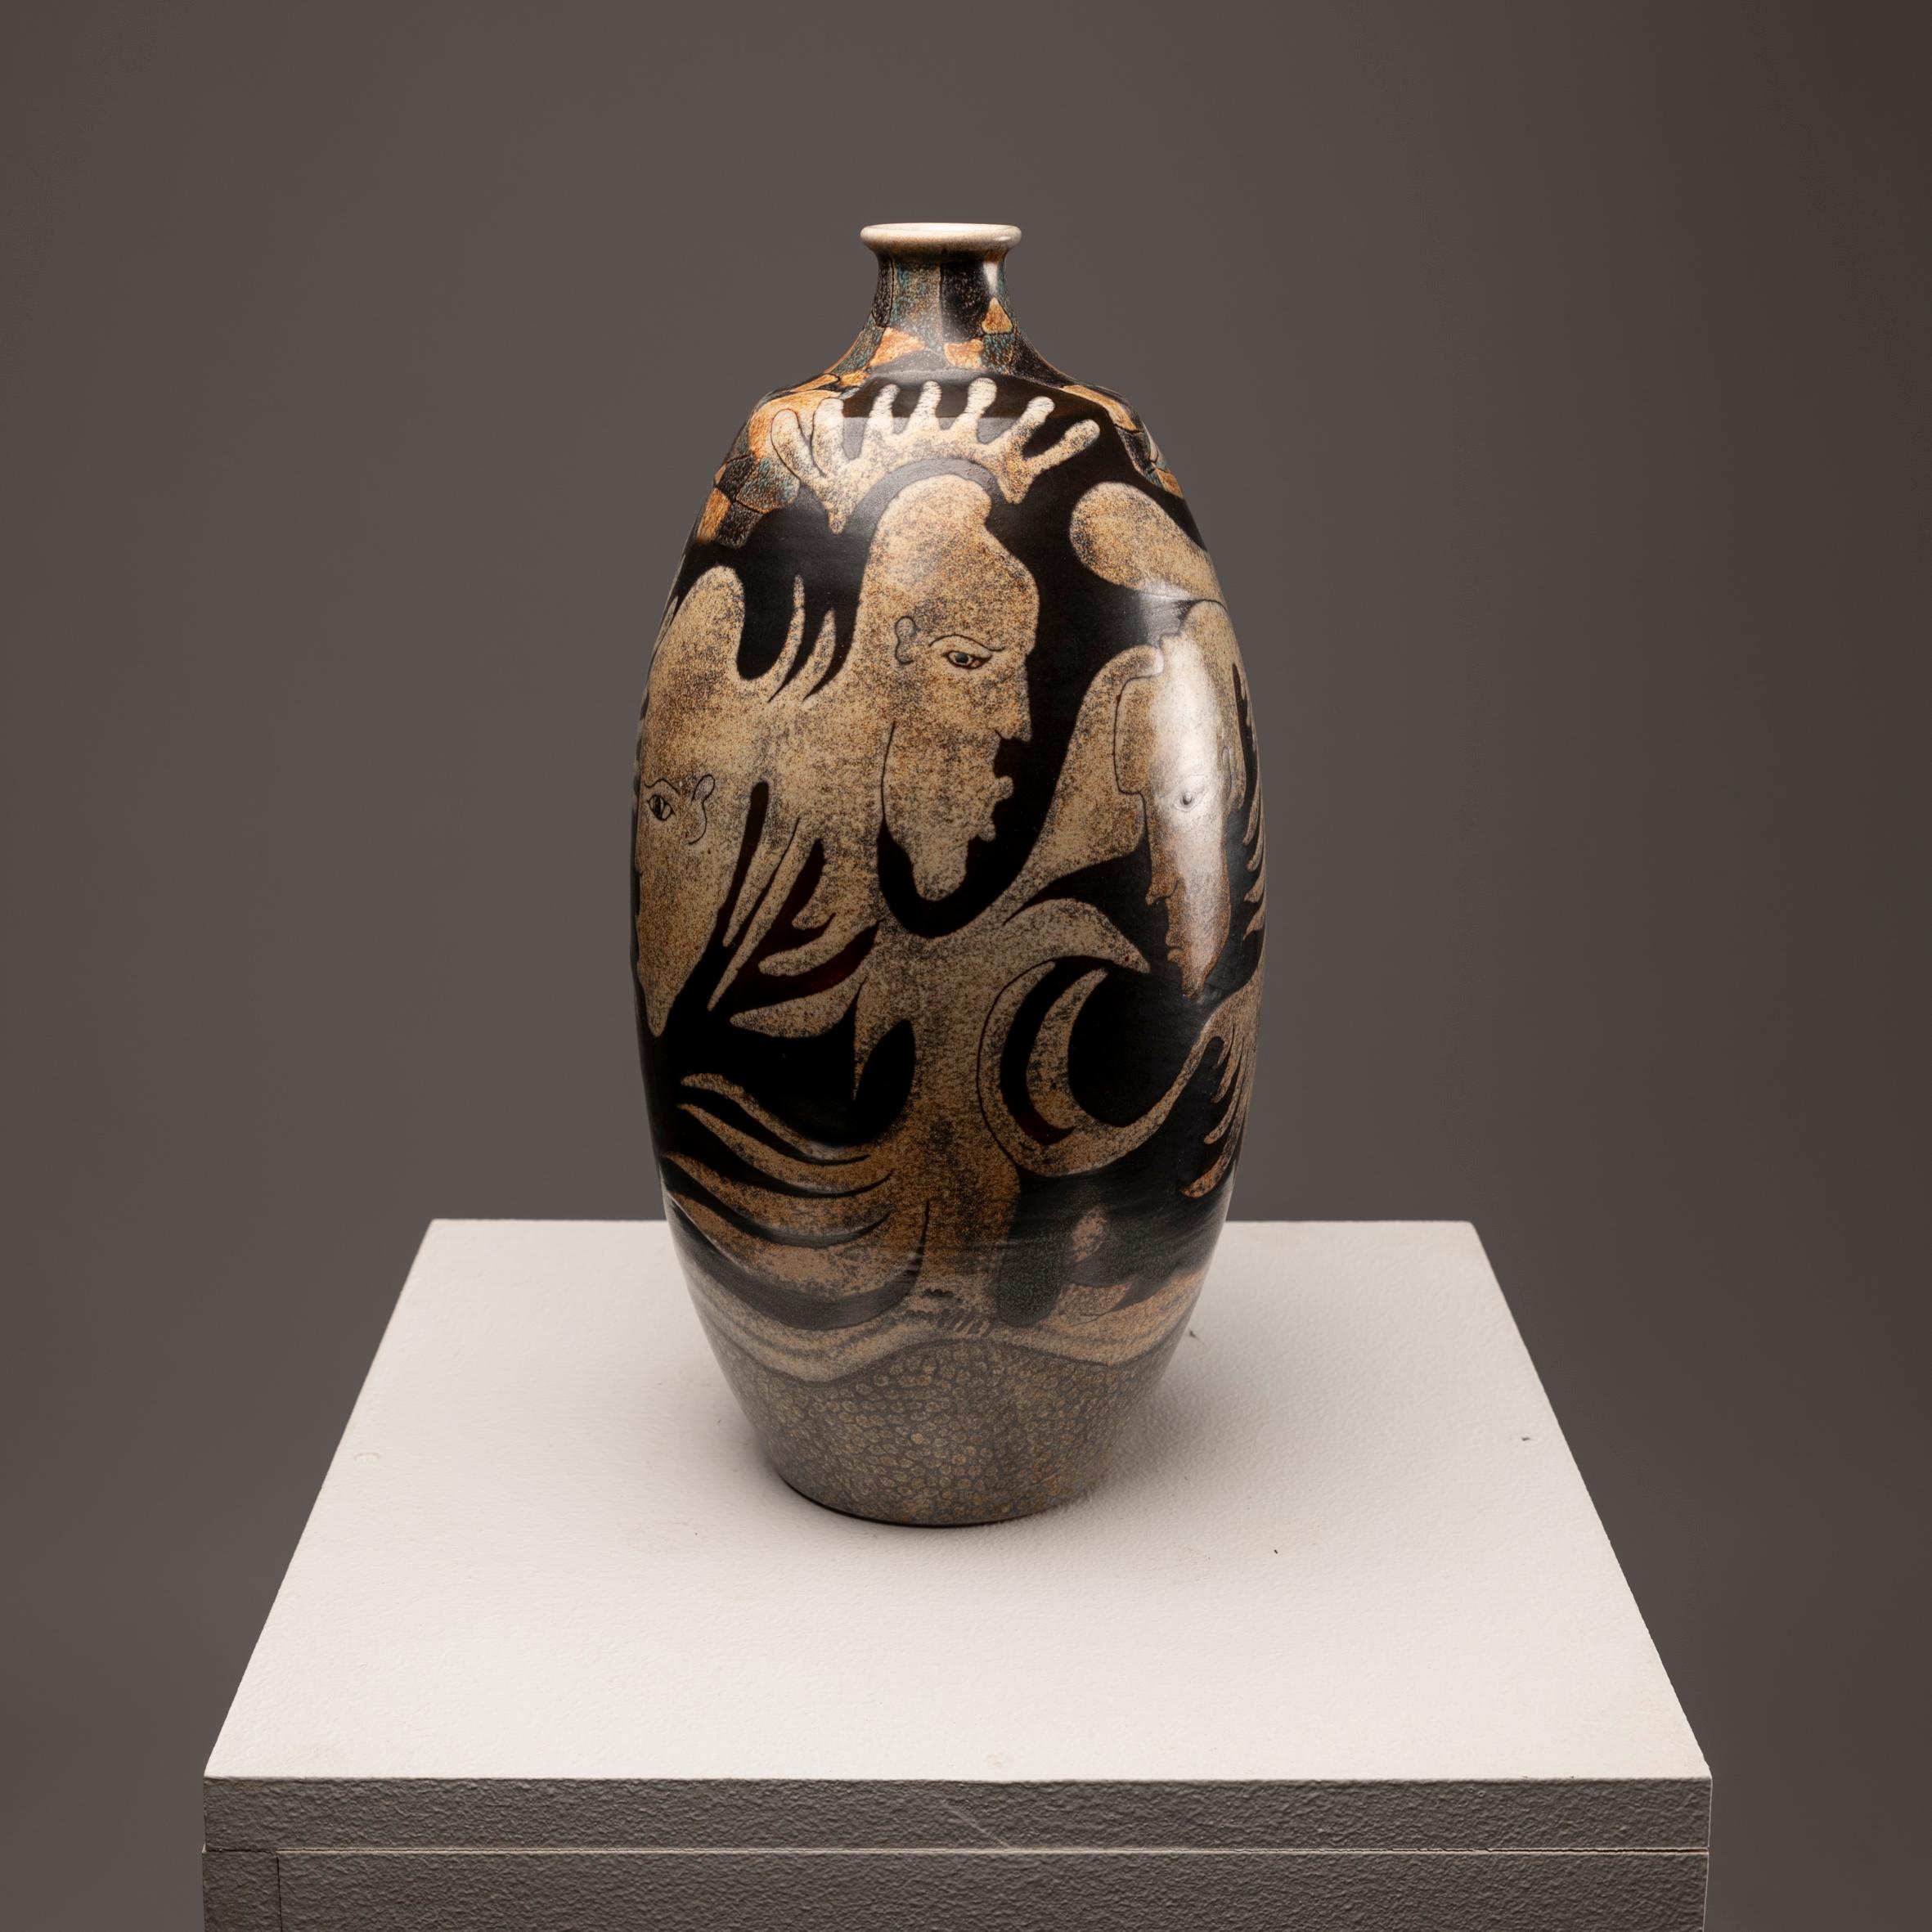 Investing in this Enameled Ceramic Vase signed by M. Millet, originating from the 1980s, presents a compelling opportunity to own a piece of unique artistic expression. Crafted with skill and creativity, this vase showcases the talent and vision of